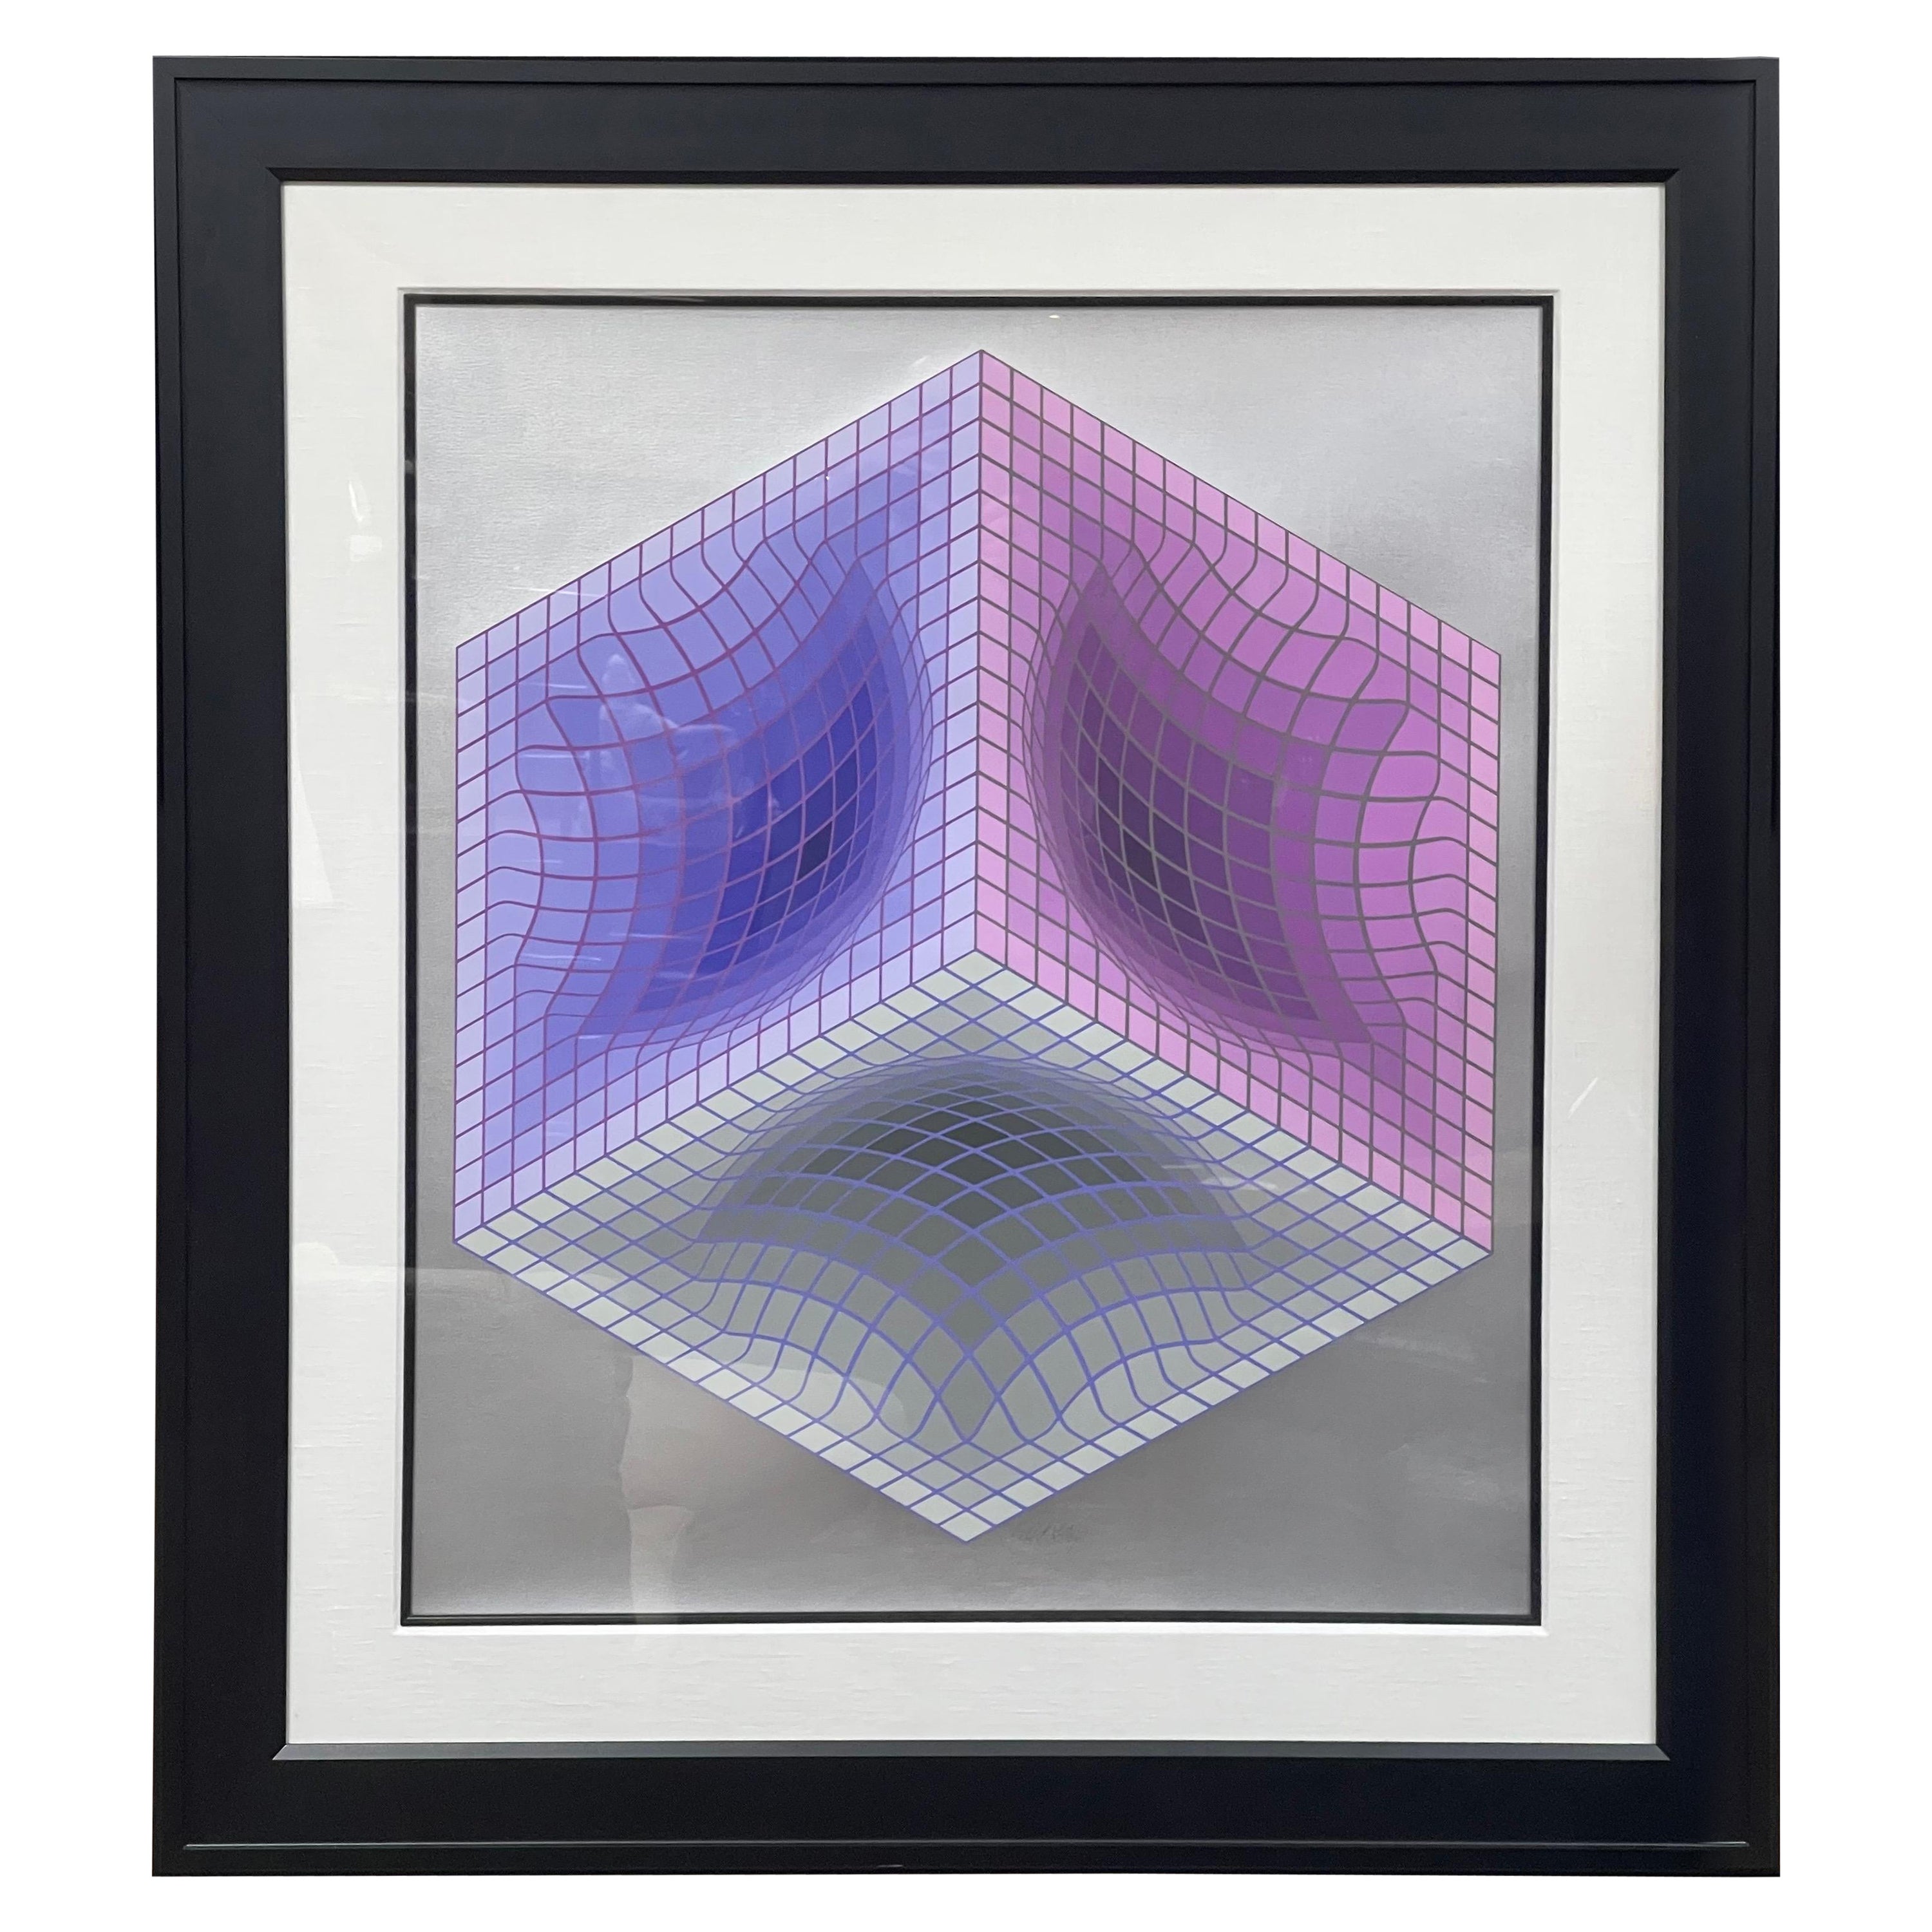 Signed Limited Edition Op Art Serigraph "Tridos" by Victor Vasarely 